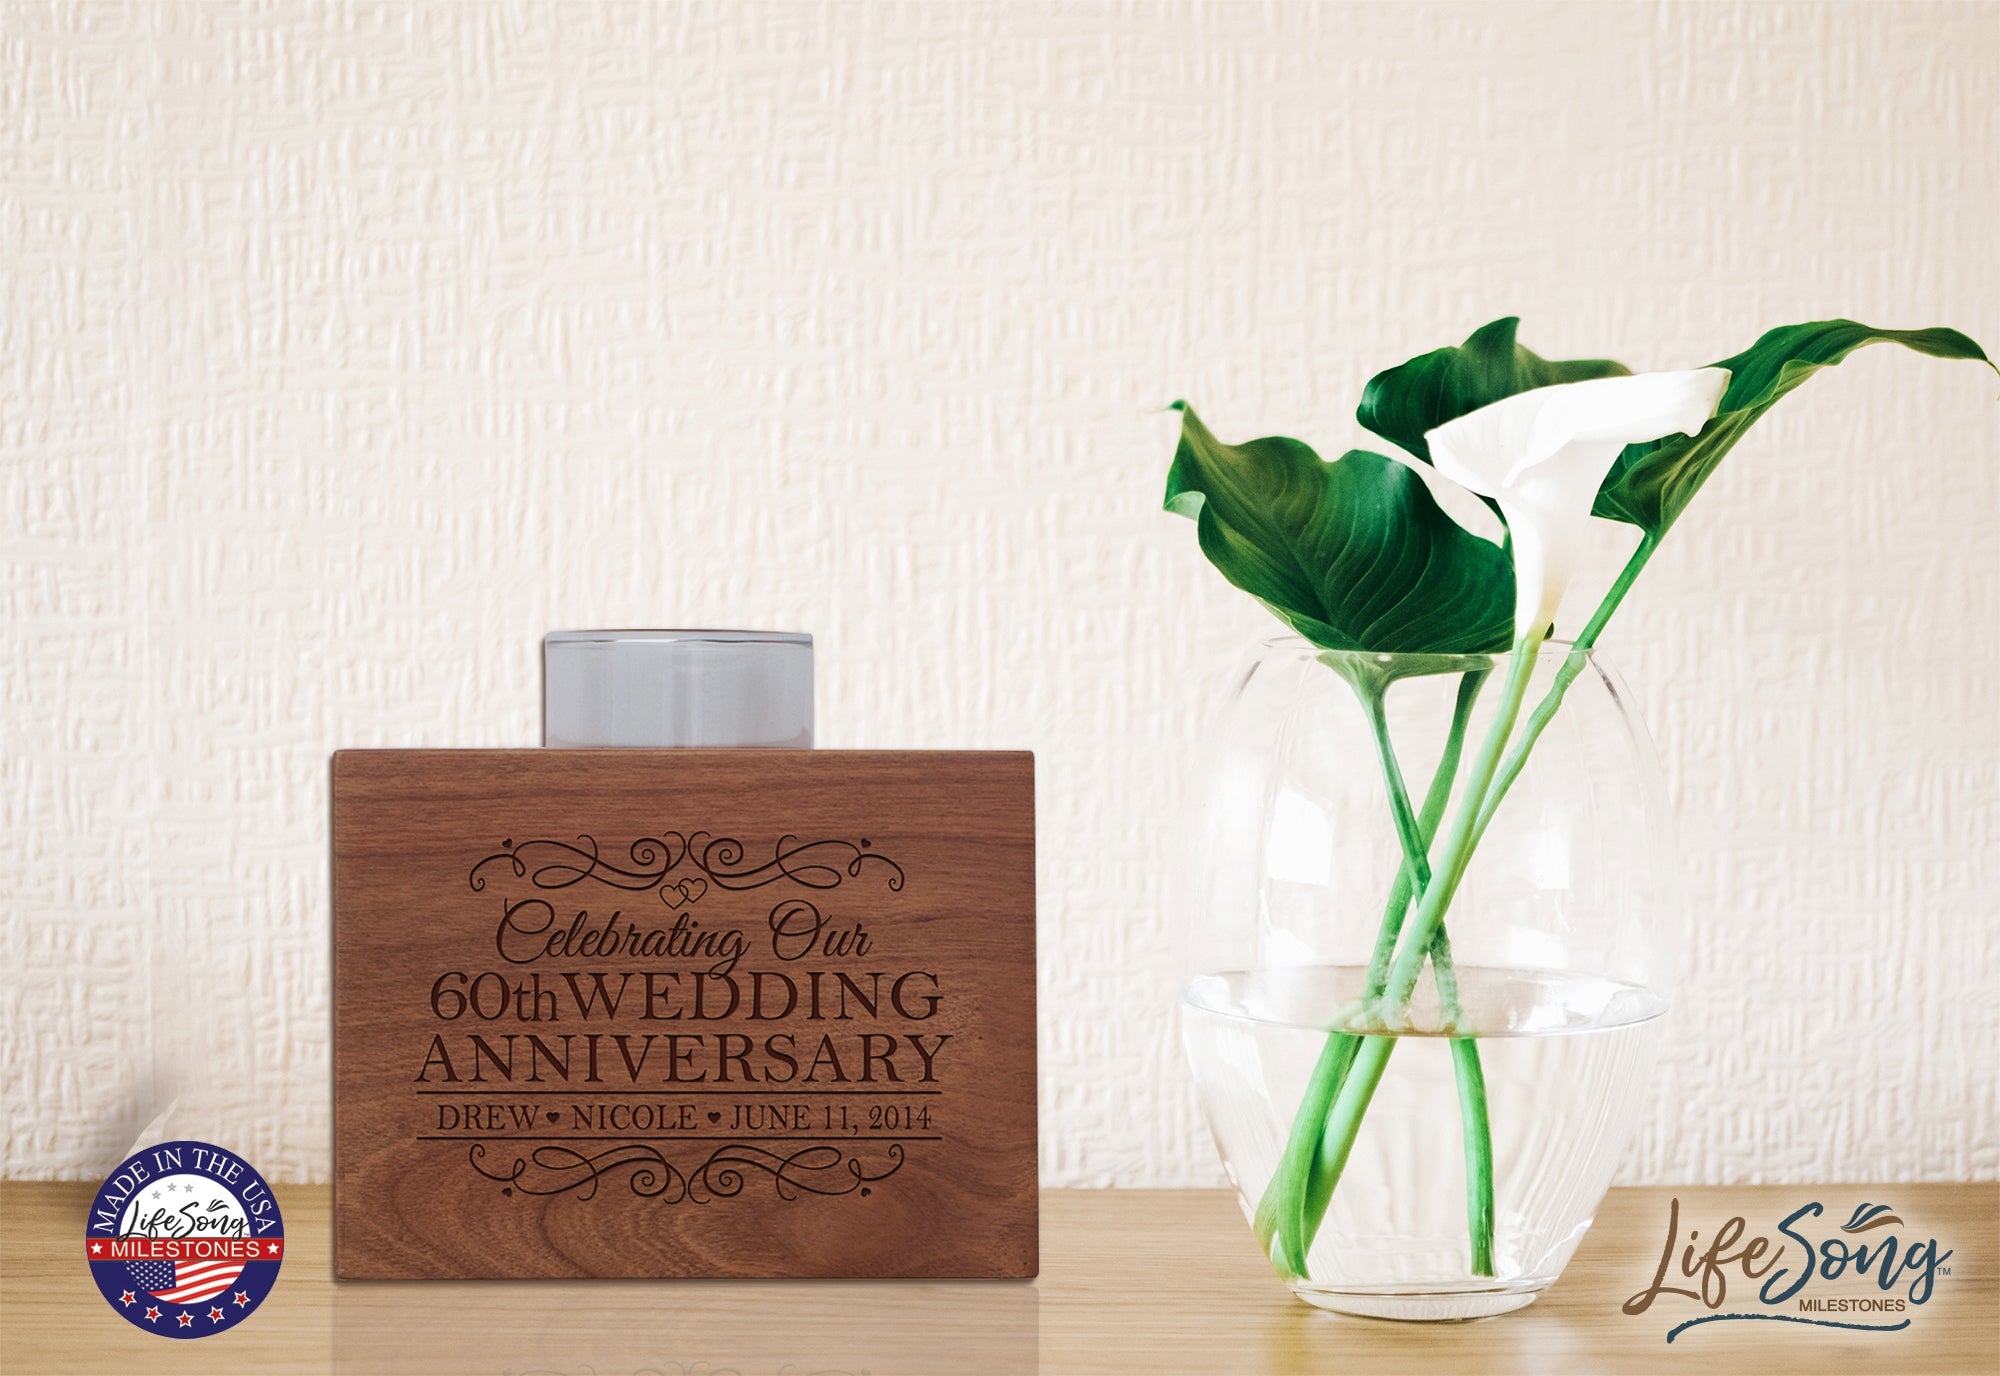 Personalized Cherry Wood Single Votive Candle Holder - 60th Wedding Anniversary - LifeSong Milestones